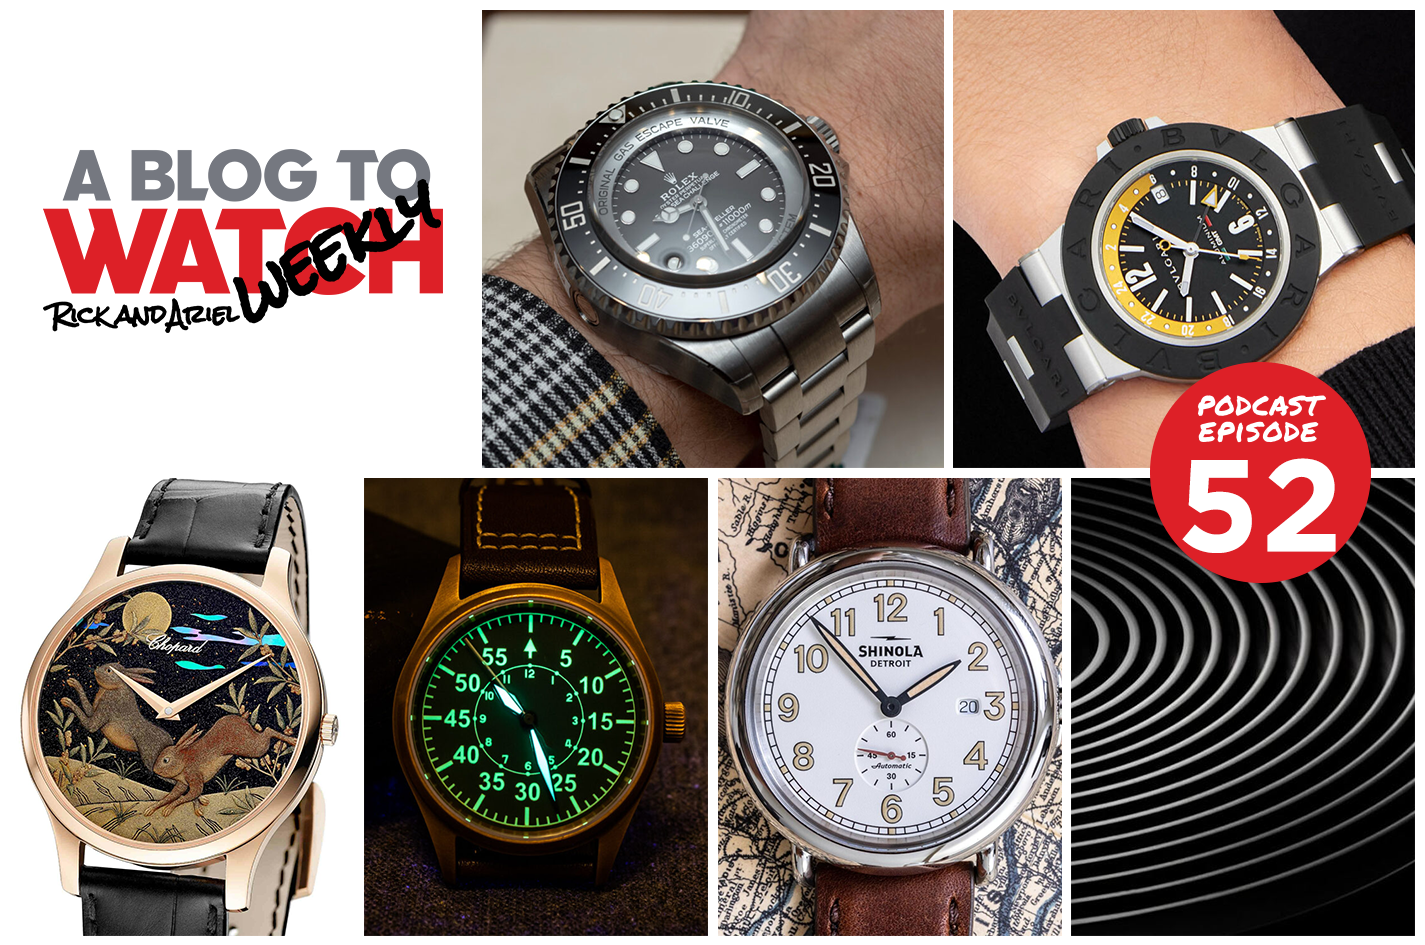 Rolex Writes A Ransom Note, Assessing Steel Alternatives, Seiko Opens A  Shoe Store, And The Bop It Watch | aBlogtoWatch